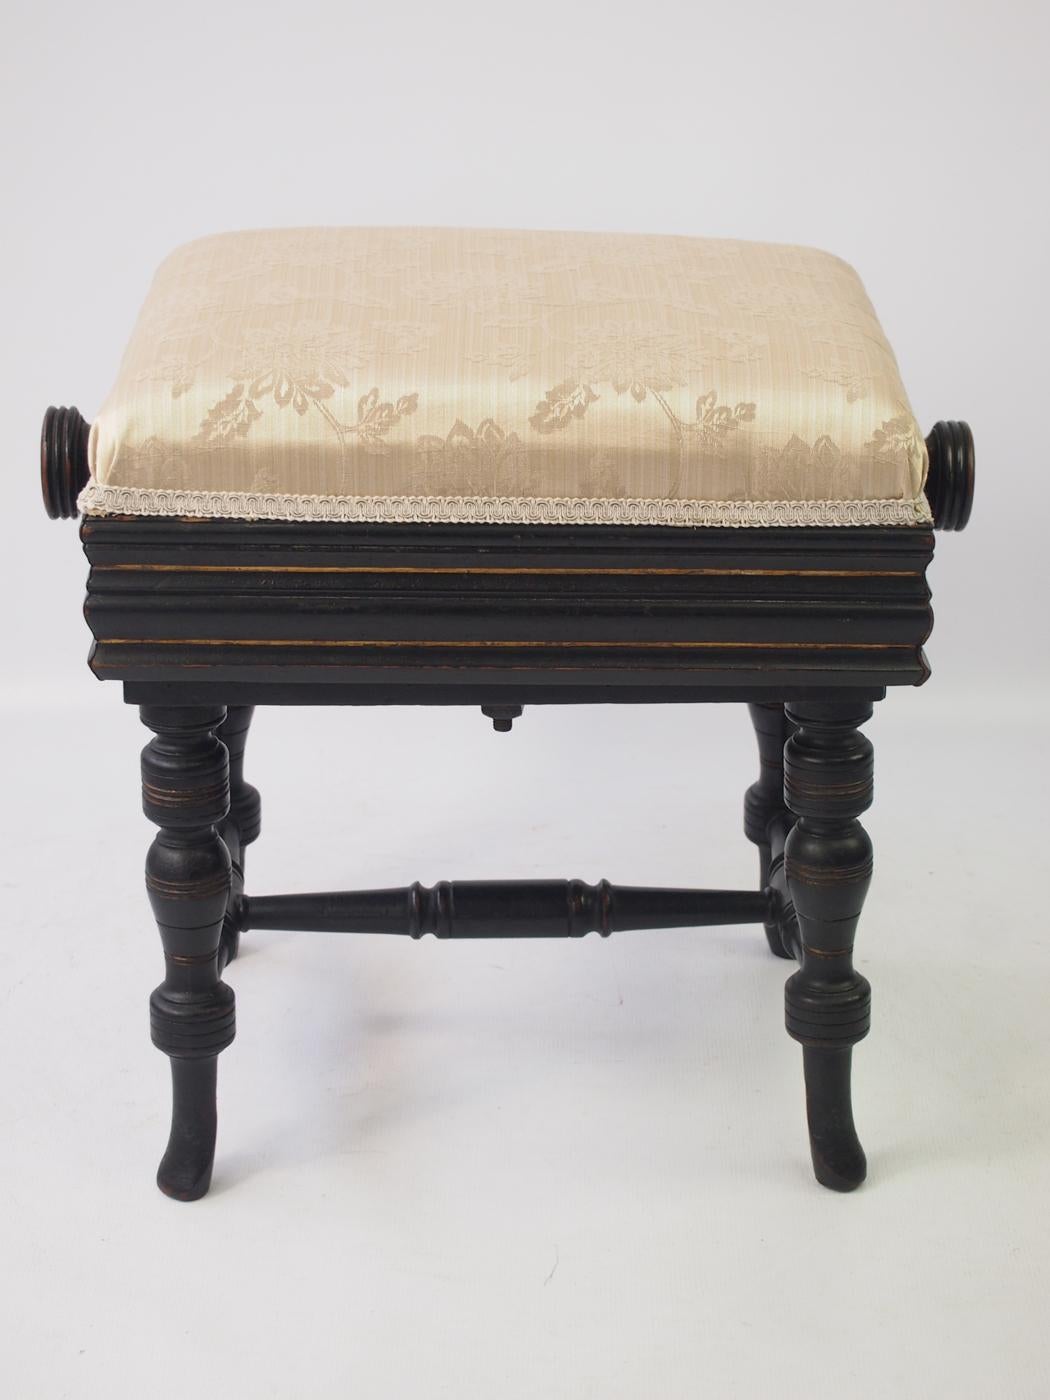 An attractive antique Victorian Aesthetic Movement piano stool with rise and fall action operated by turning knobs on either side of the seat dating from circa 1880. It has a reeded seat support and knobs and stands on turned legs with cross